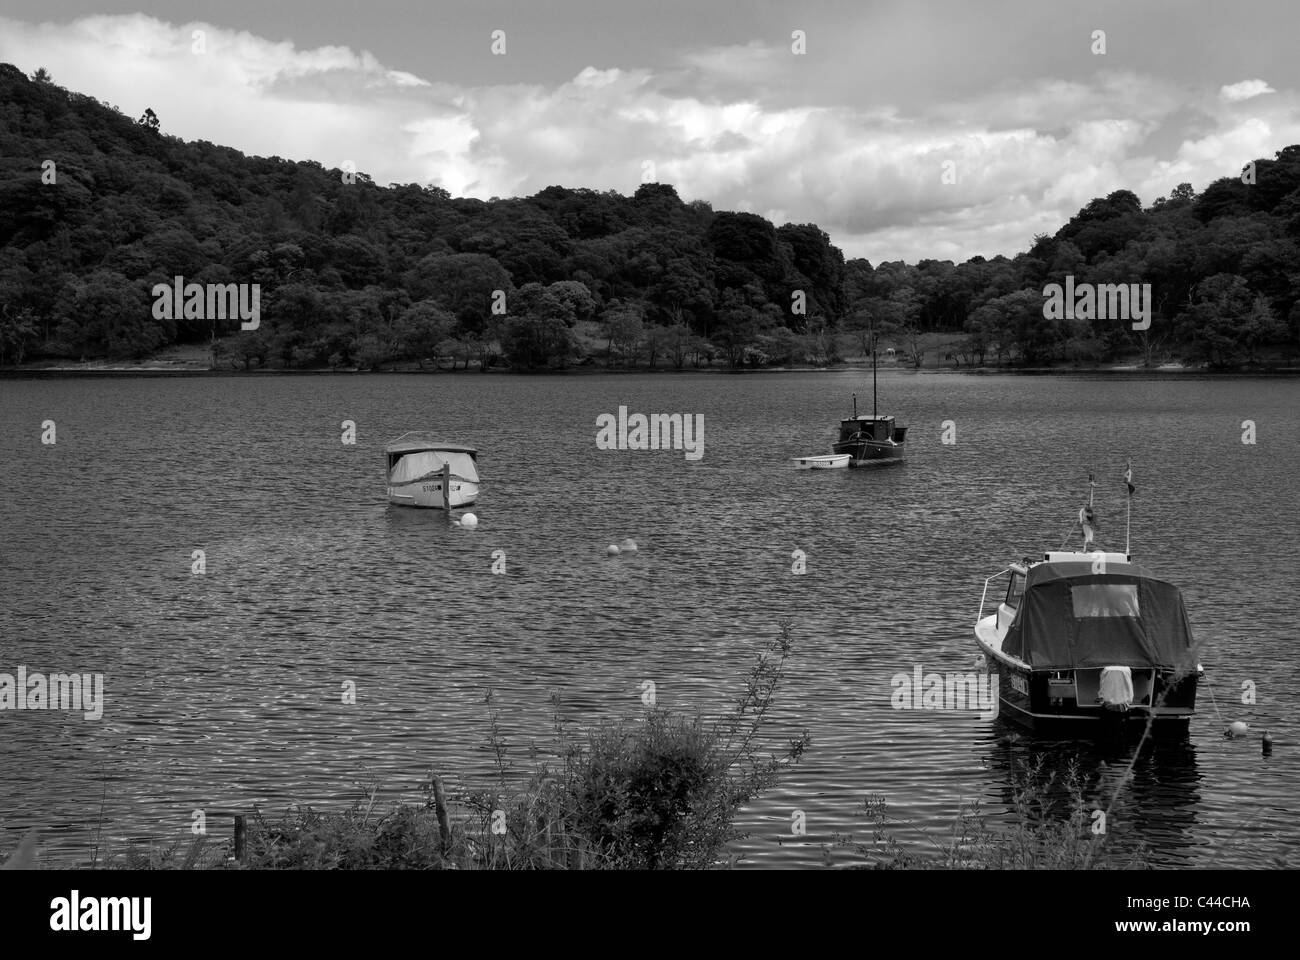 Loch ness scotland Black and White Stock Photos & Images - Alamy